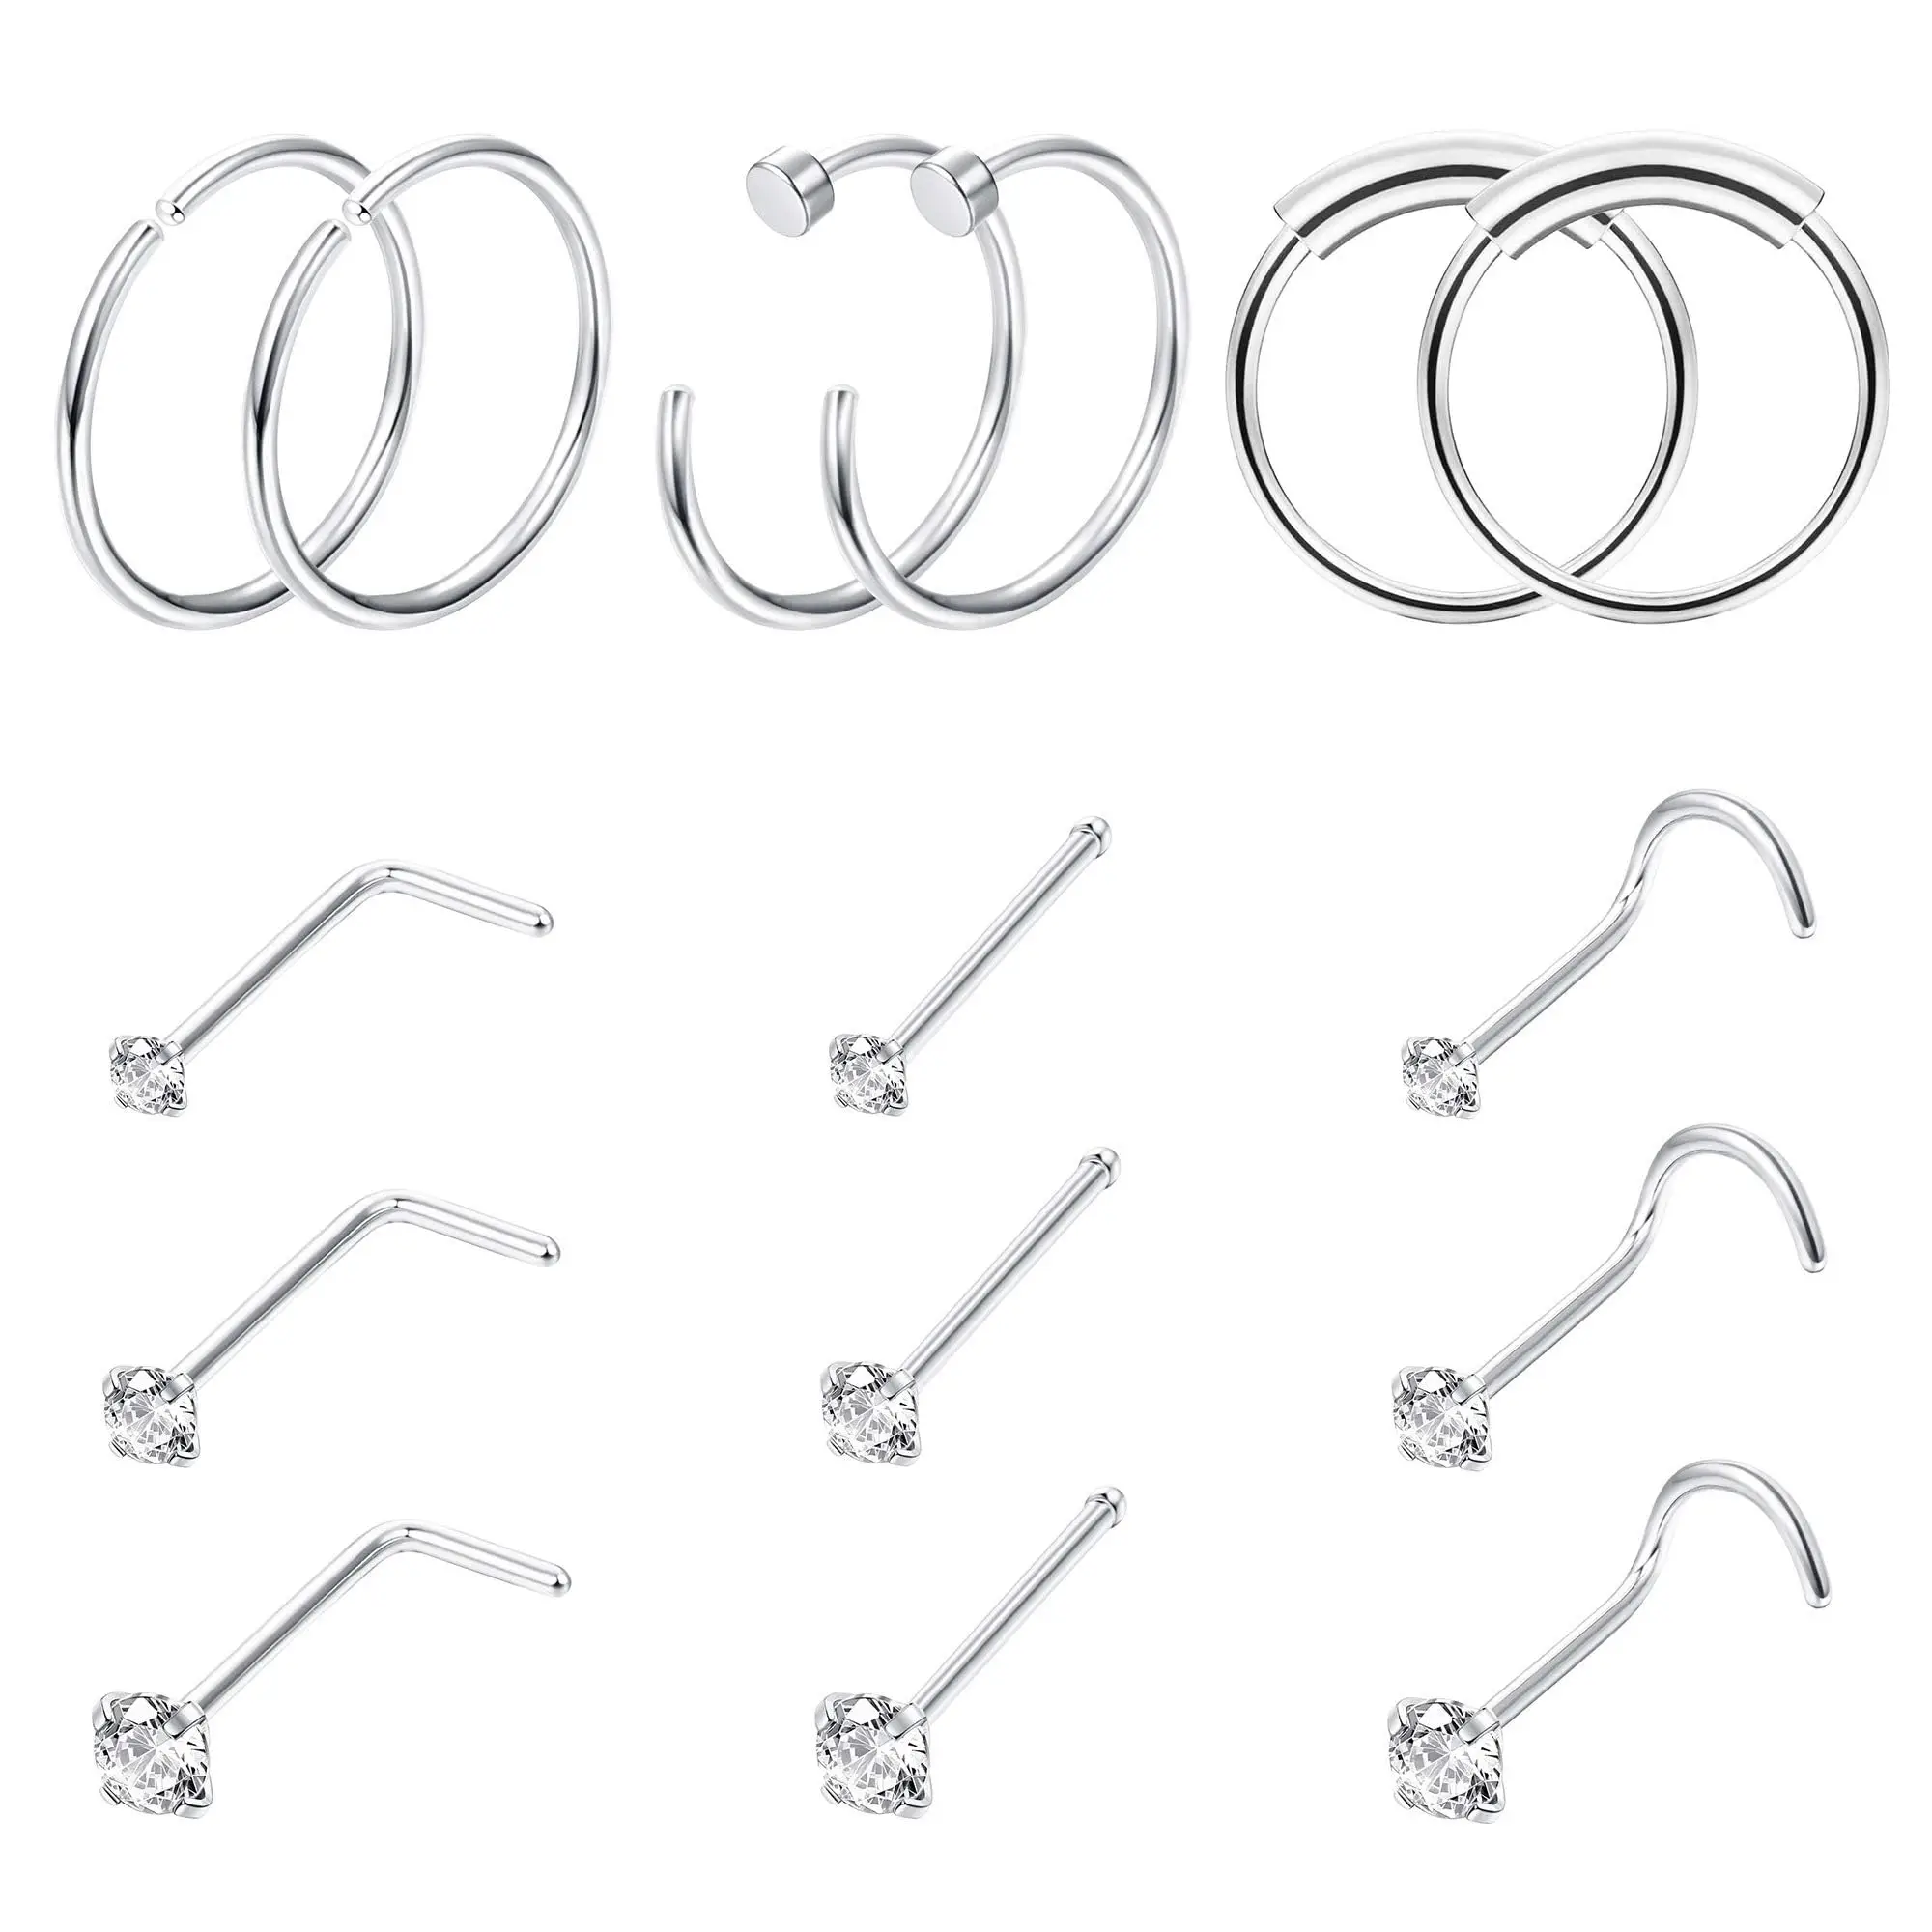 

15PCS 20G Surgical Steel Nose Rings Multiple Colors Hoop Studs Cartilage Earrings Body Piercing Jewelry 1.5mm 2mm 2.5mm CZ